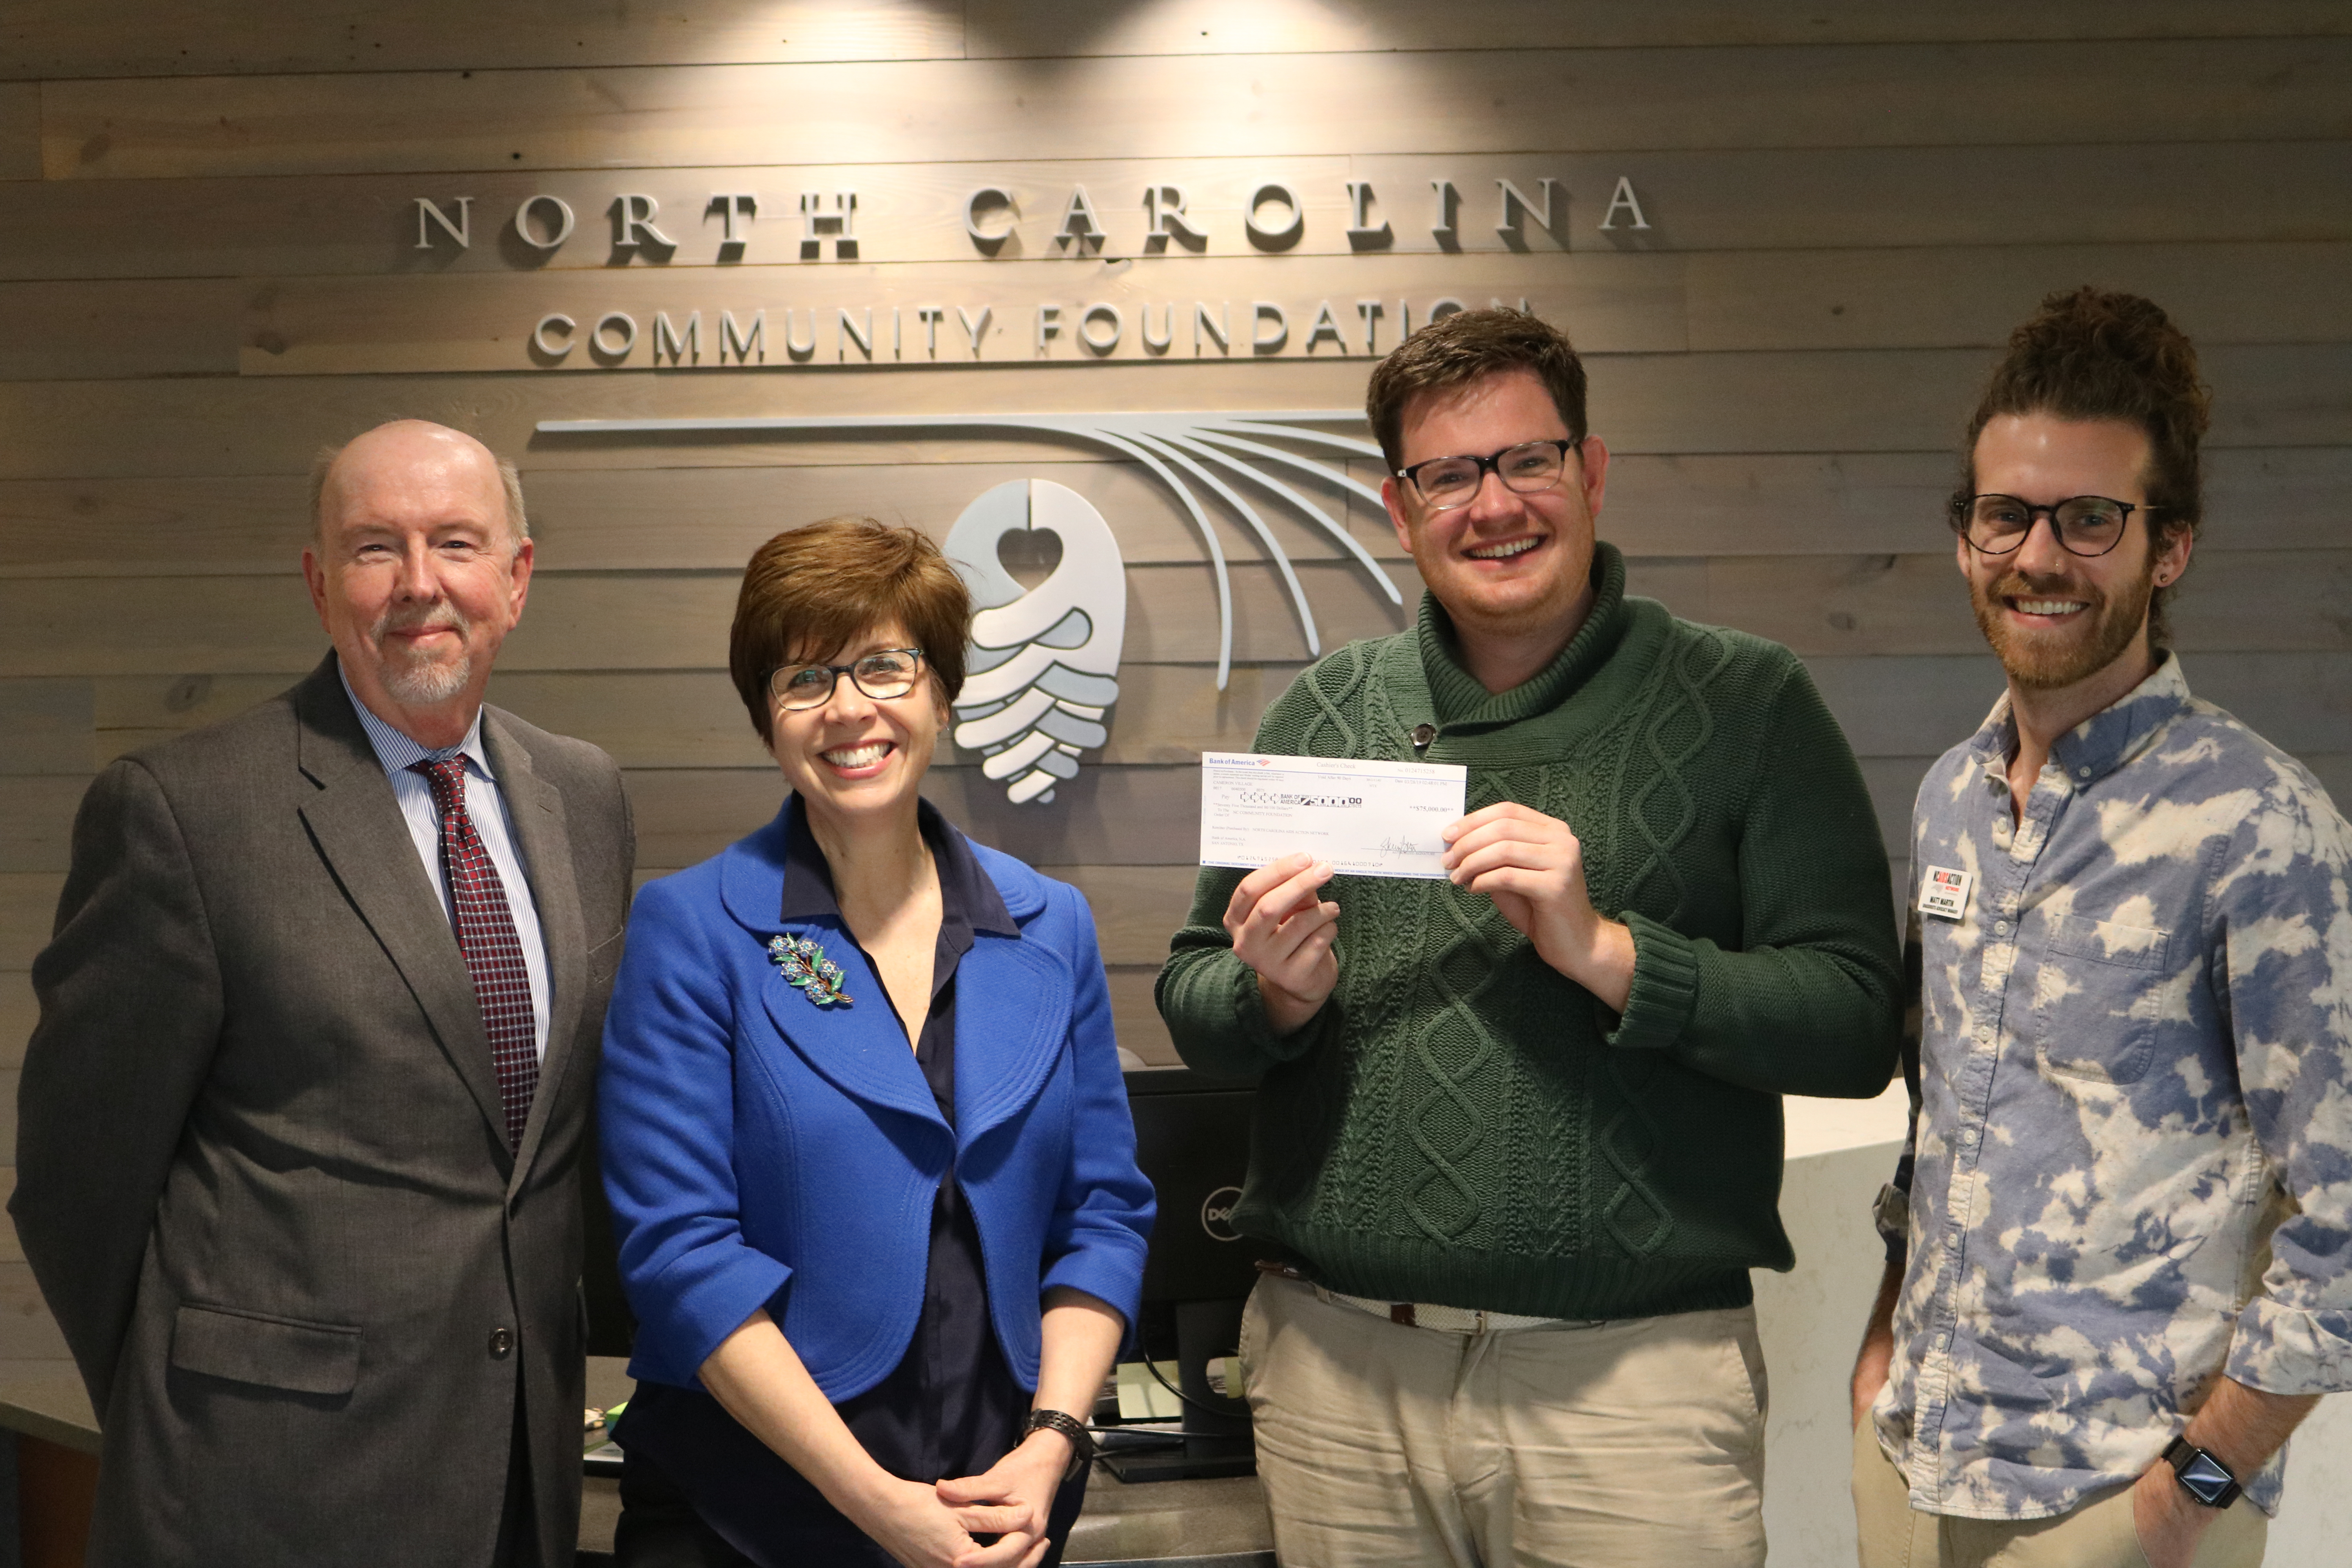 Pictured founding the NC AIDS Action Network Endowment are (left to right): John Hartley, NCCF chief investment officer and director of finance; Jennifer Tolle Whiteside, NCCF CEO and president; Lee Storrow, NCAAN executive director; and Matt Martin, NCAAN grassroots advocacy manager.